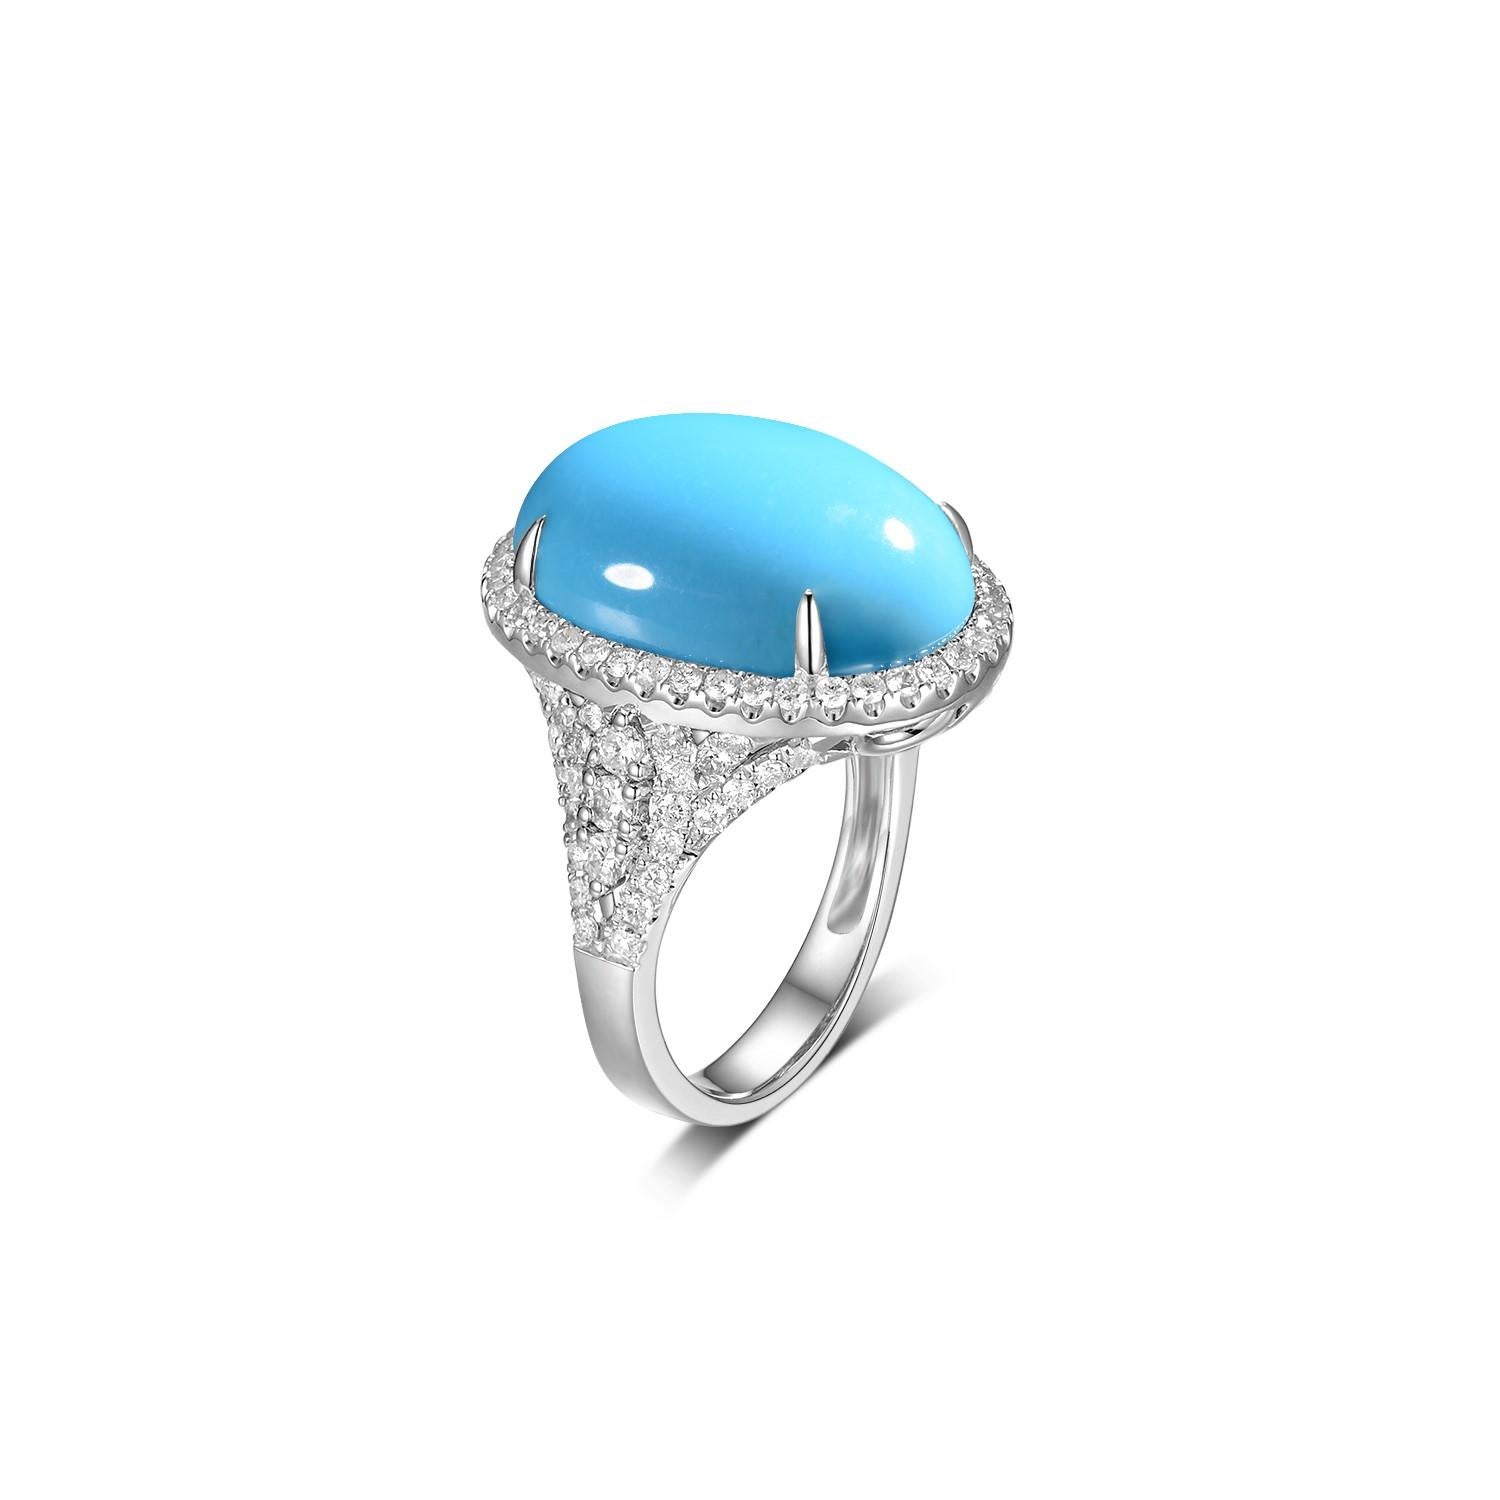 This ring features a 11.28 carat sleeping beauty turquoise. All turquoise use in production are from the prominent Sleeping Beauty Mine. Famous for it solid, light blue color with no matrix. Assented with 0.9 carat of white round diamonds. Ring is